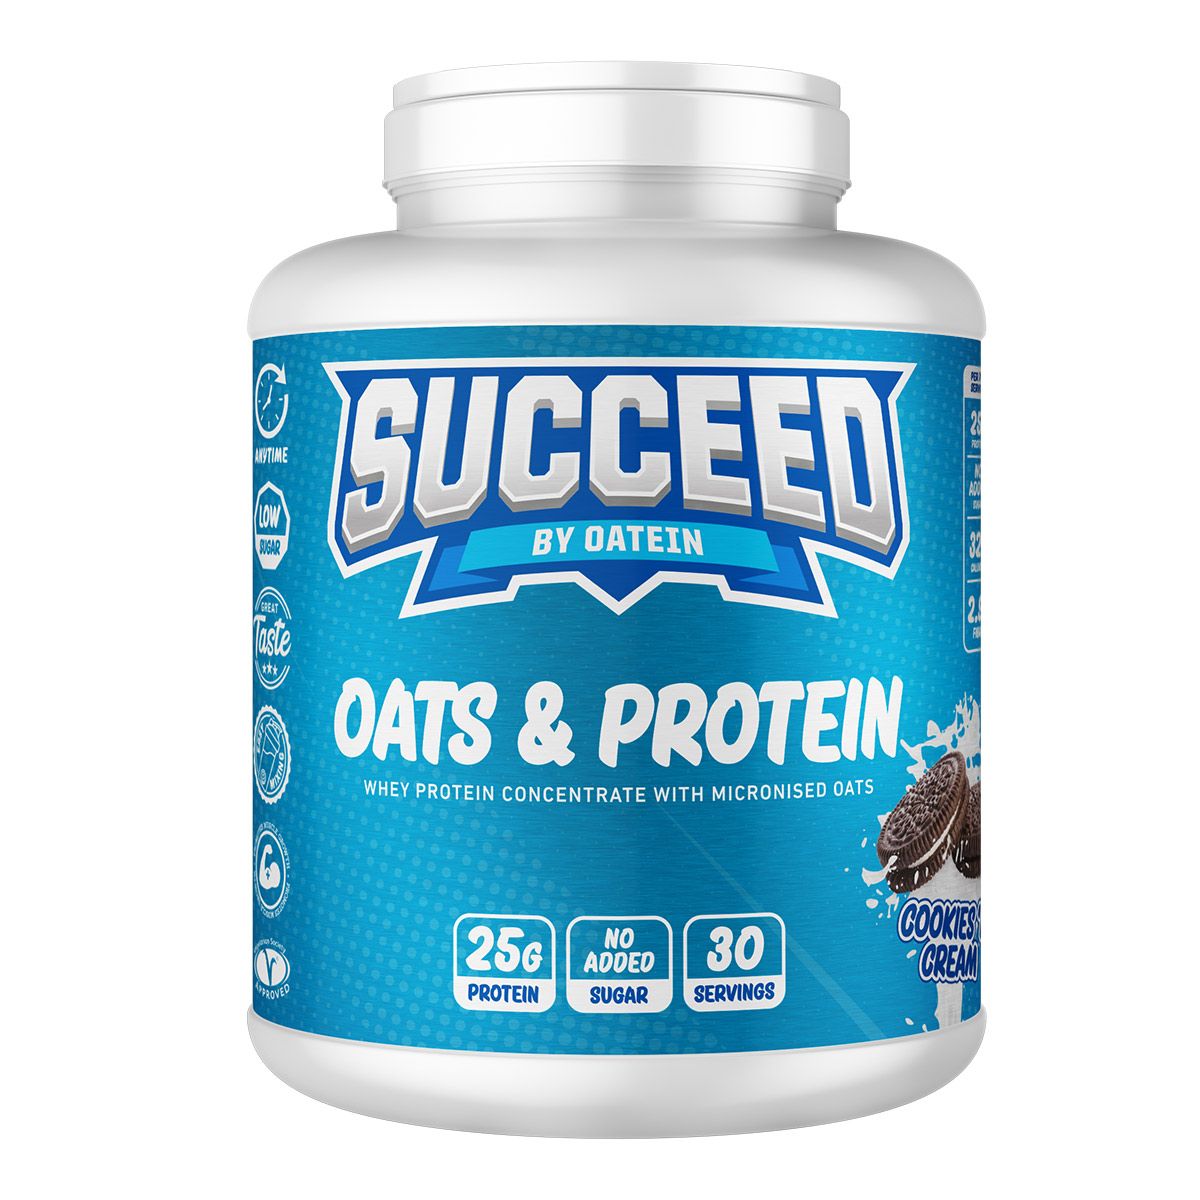 Oatein Succeed Oats & Whey Protein - Cookies & Cream 2.2kg